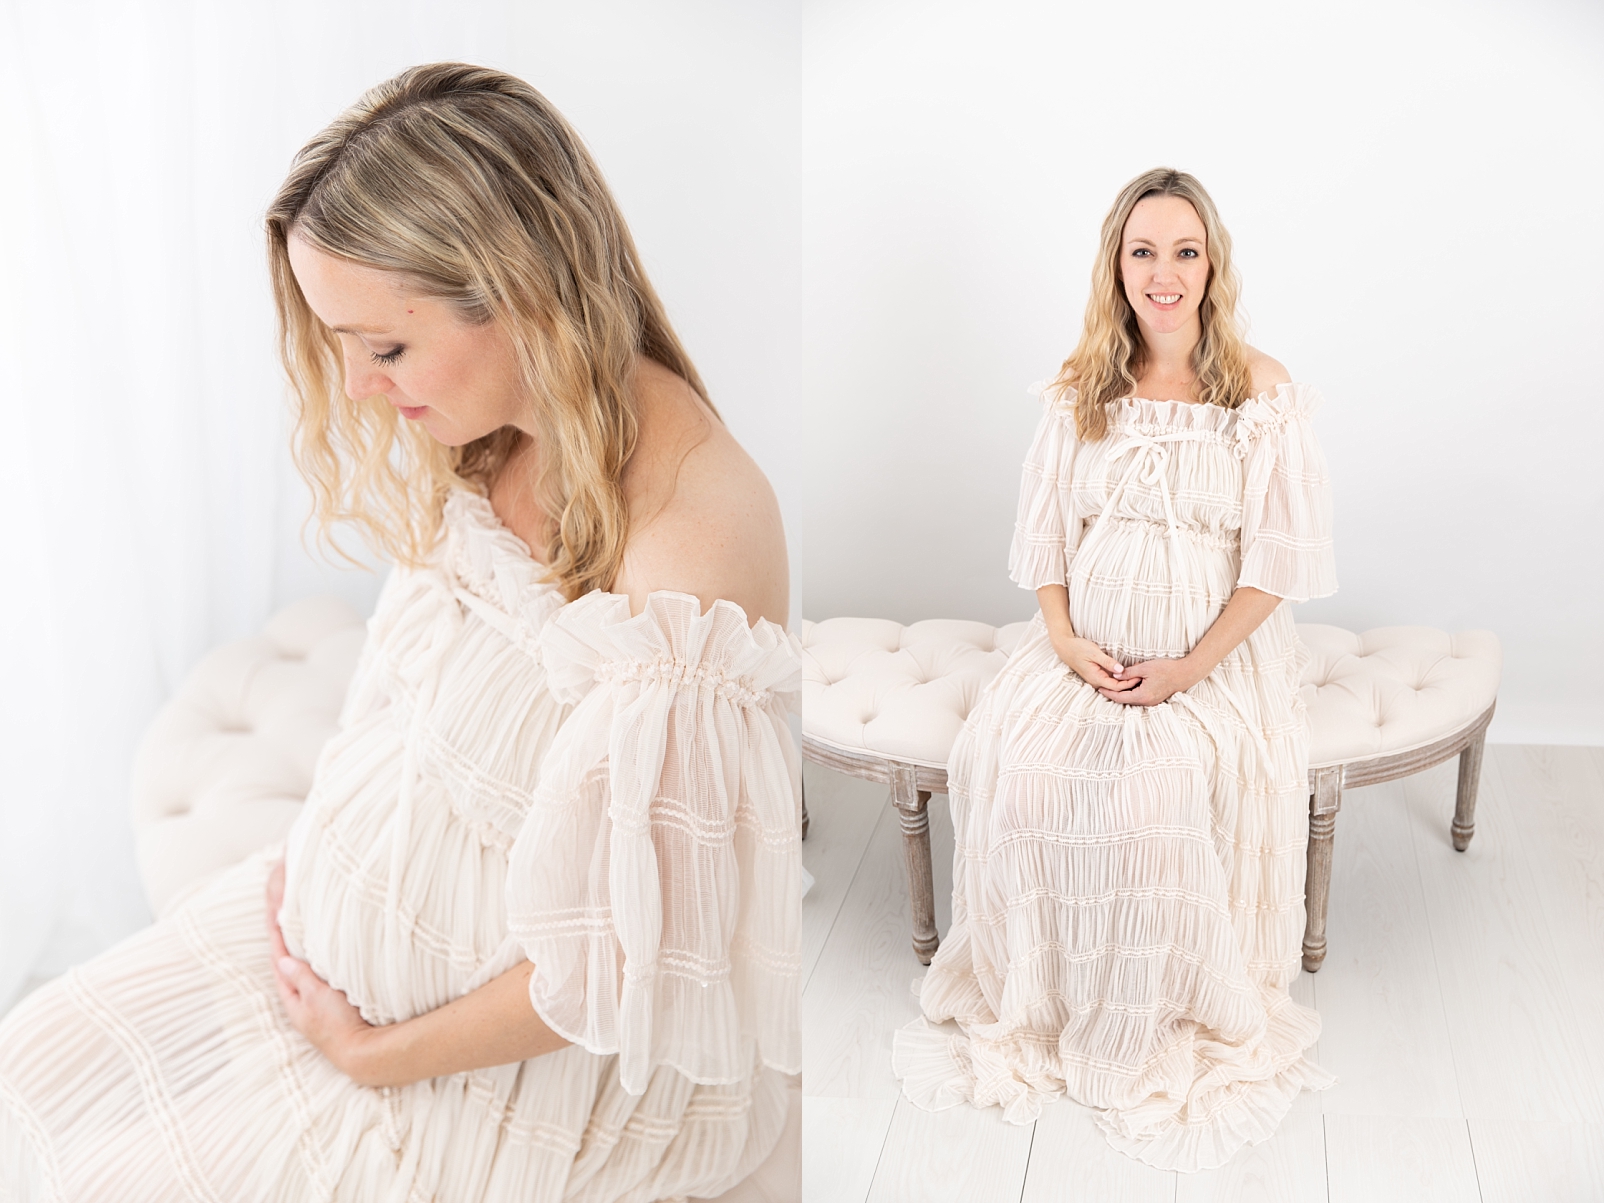 Pregnant mother in a beautiful gown sitting on a linen tufted bench with Ellicott City Maternity Photographer | Rebecca Leigh Photography
